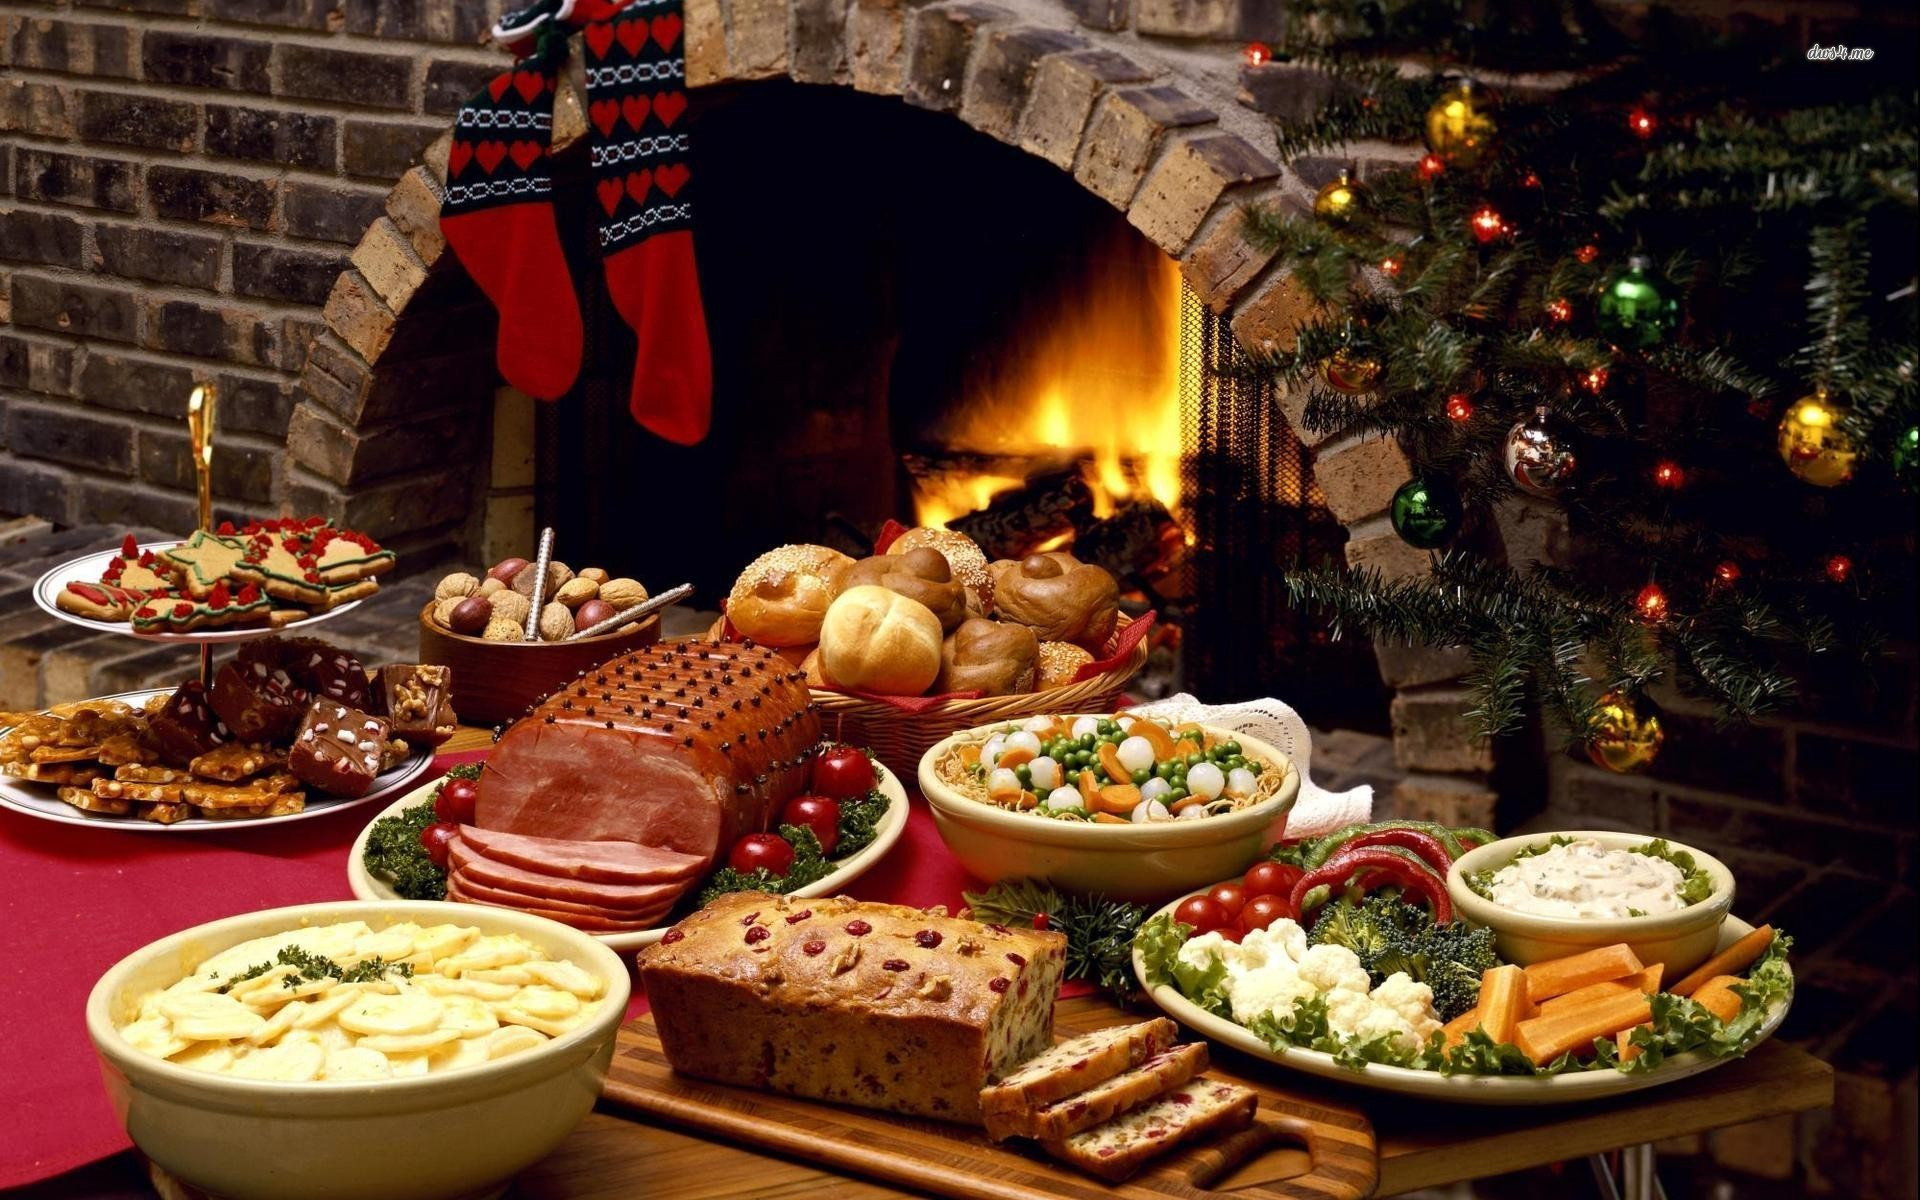 Images Of Christmas Dinners
 Christmas dinner ideas for a crowd nontraditional menu